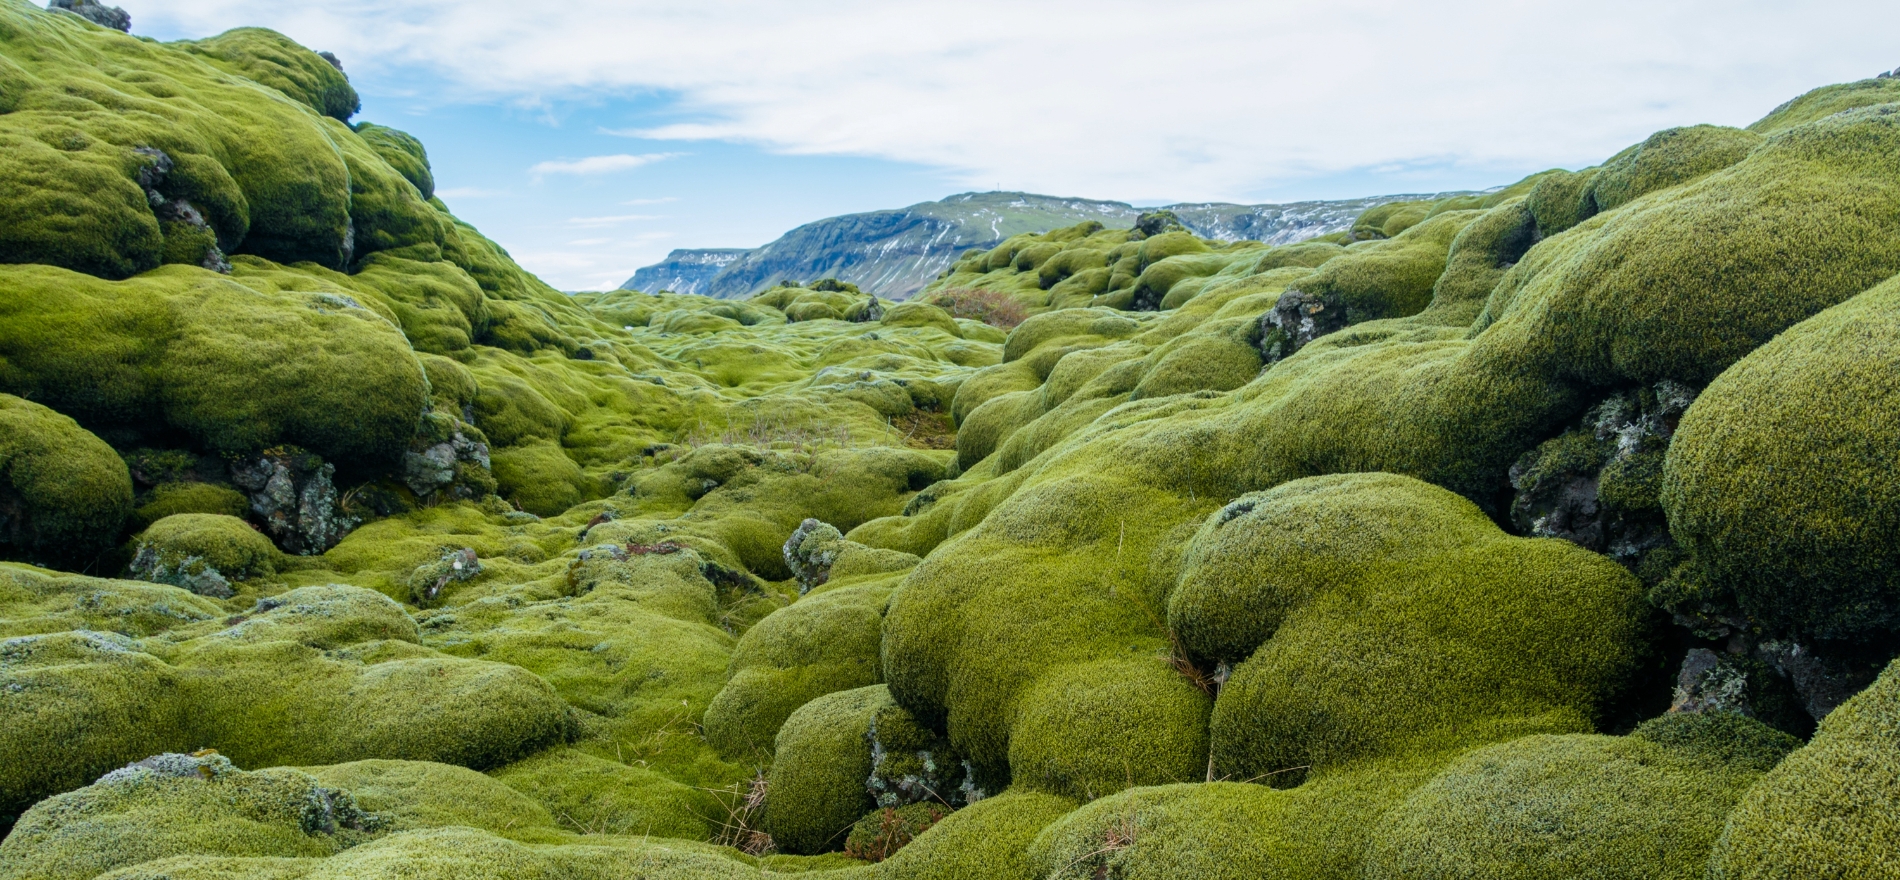 A green and lush lava field in Iceland